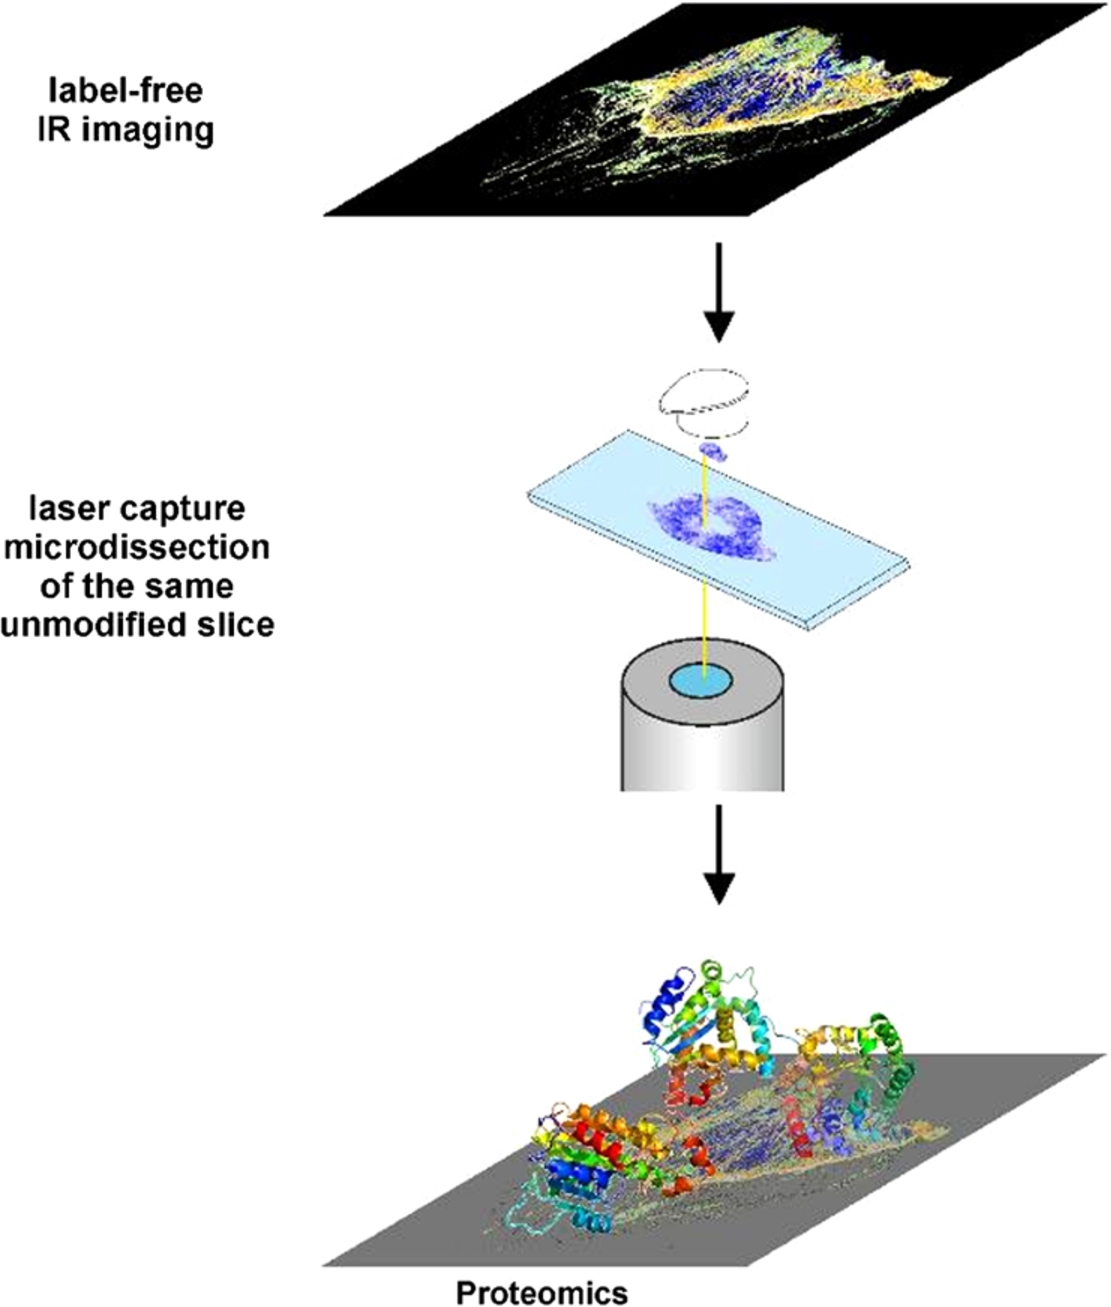 IR-guided laser capture microdissection (LCM) allows spatial and molecular resolution. The label-free IR imaging tissue classification can be used to cut out very precisely homogeneous tissue regions by LCM [9]. This allows correlating the spectral patterns with the molecular changes in the tissue. In addition, it opens up a completely new field of application for marker-free digital pathology in biomarker research. With no other method, it is possible to select homogeneous tissue samples for subsequent molecular analyses.